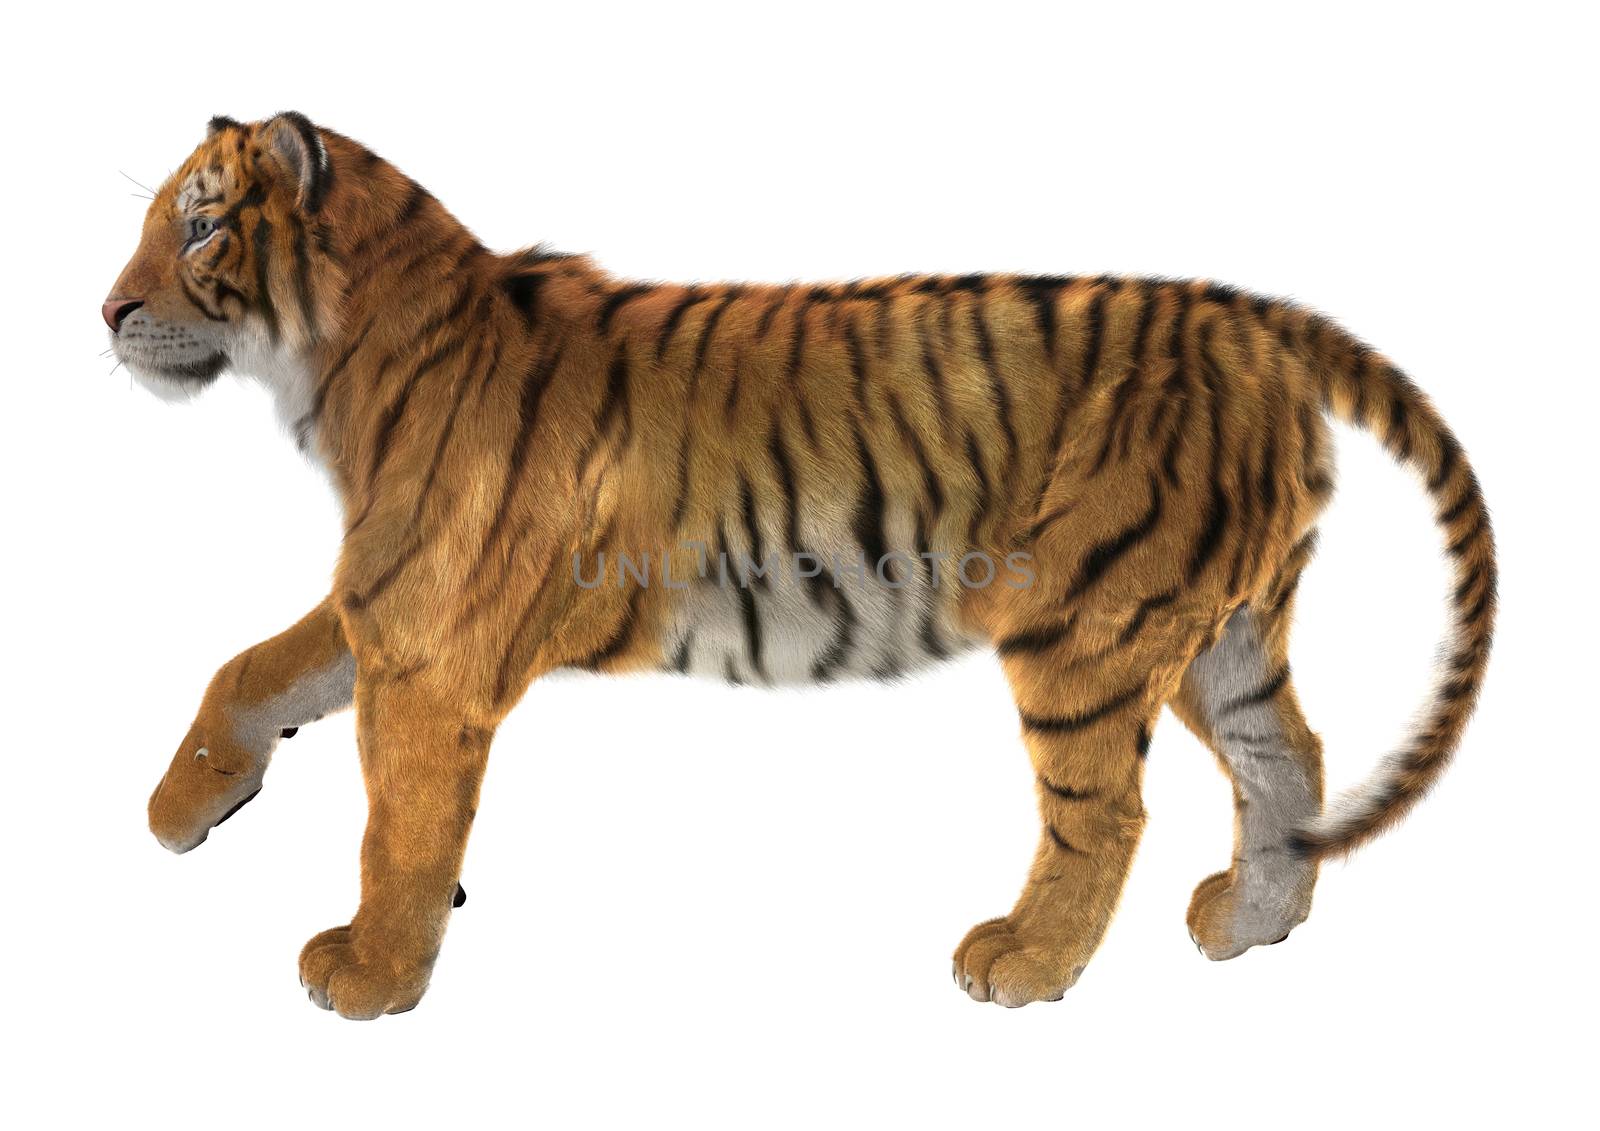 3D digital render of a tiger isolated on white background